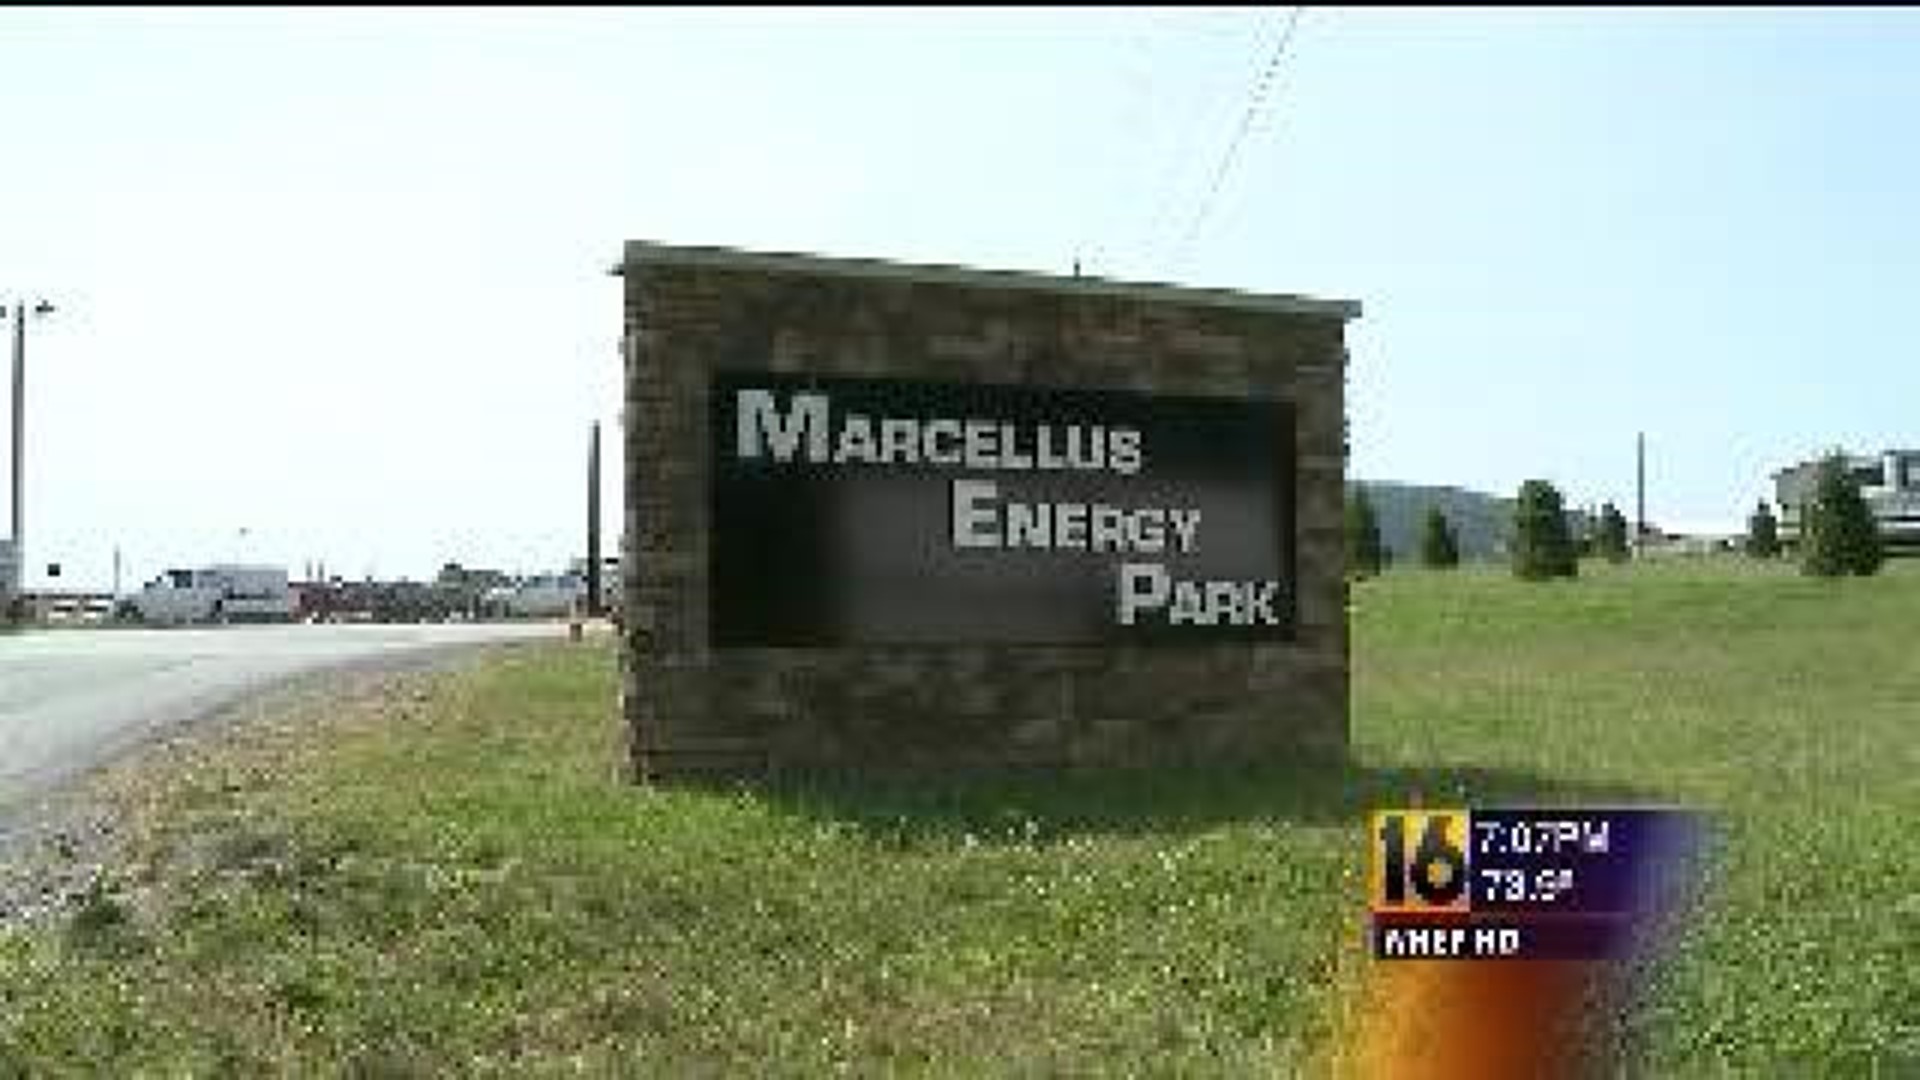 County Studies Look at Marcellus Shale Impacts